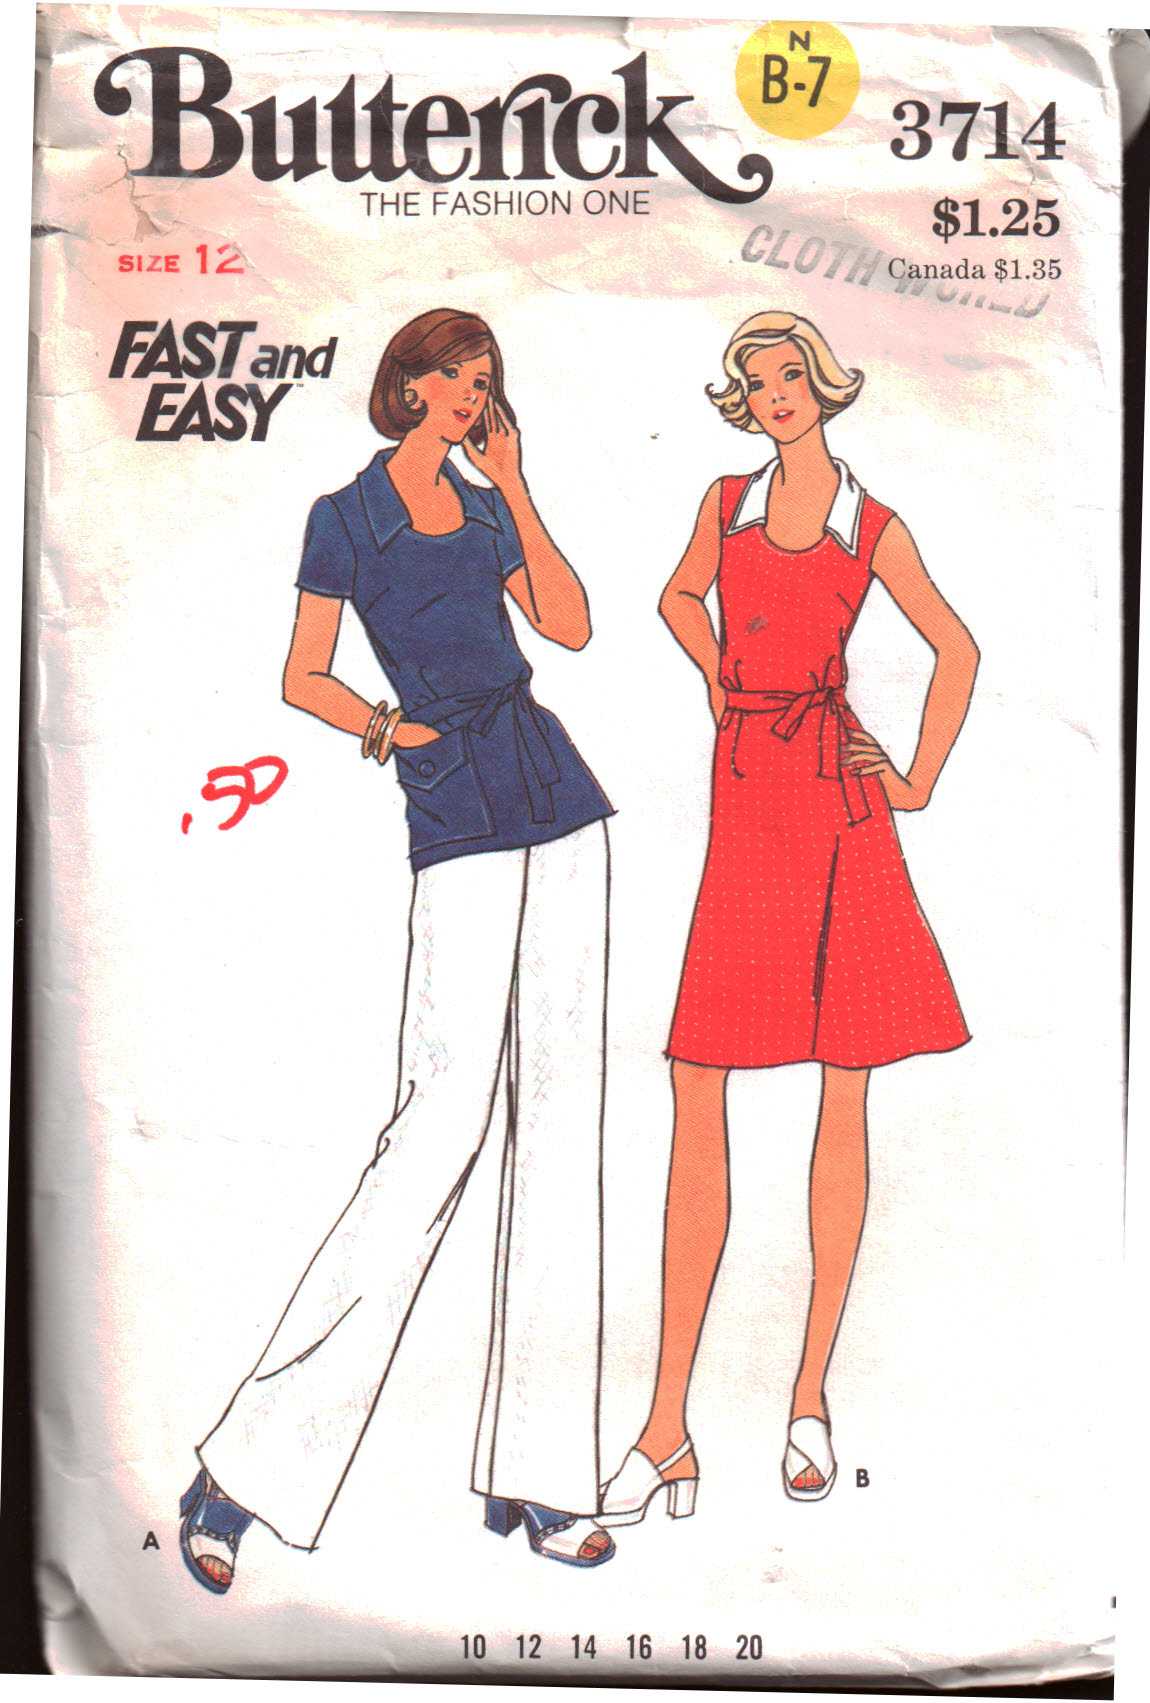 Butterick 3714 Dresses, Tops, Pants Size: 12 Used Sewing Pattern